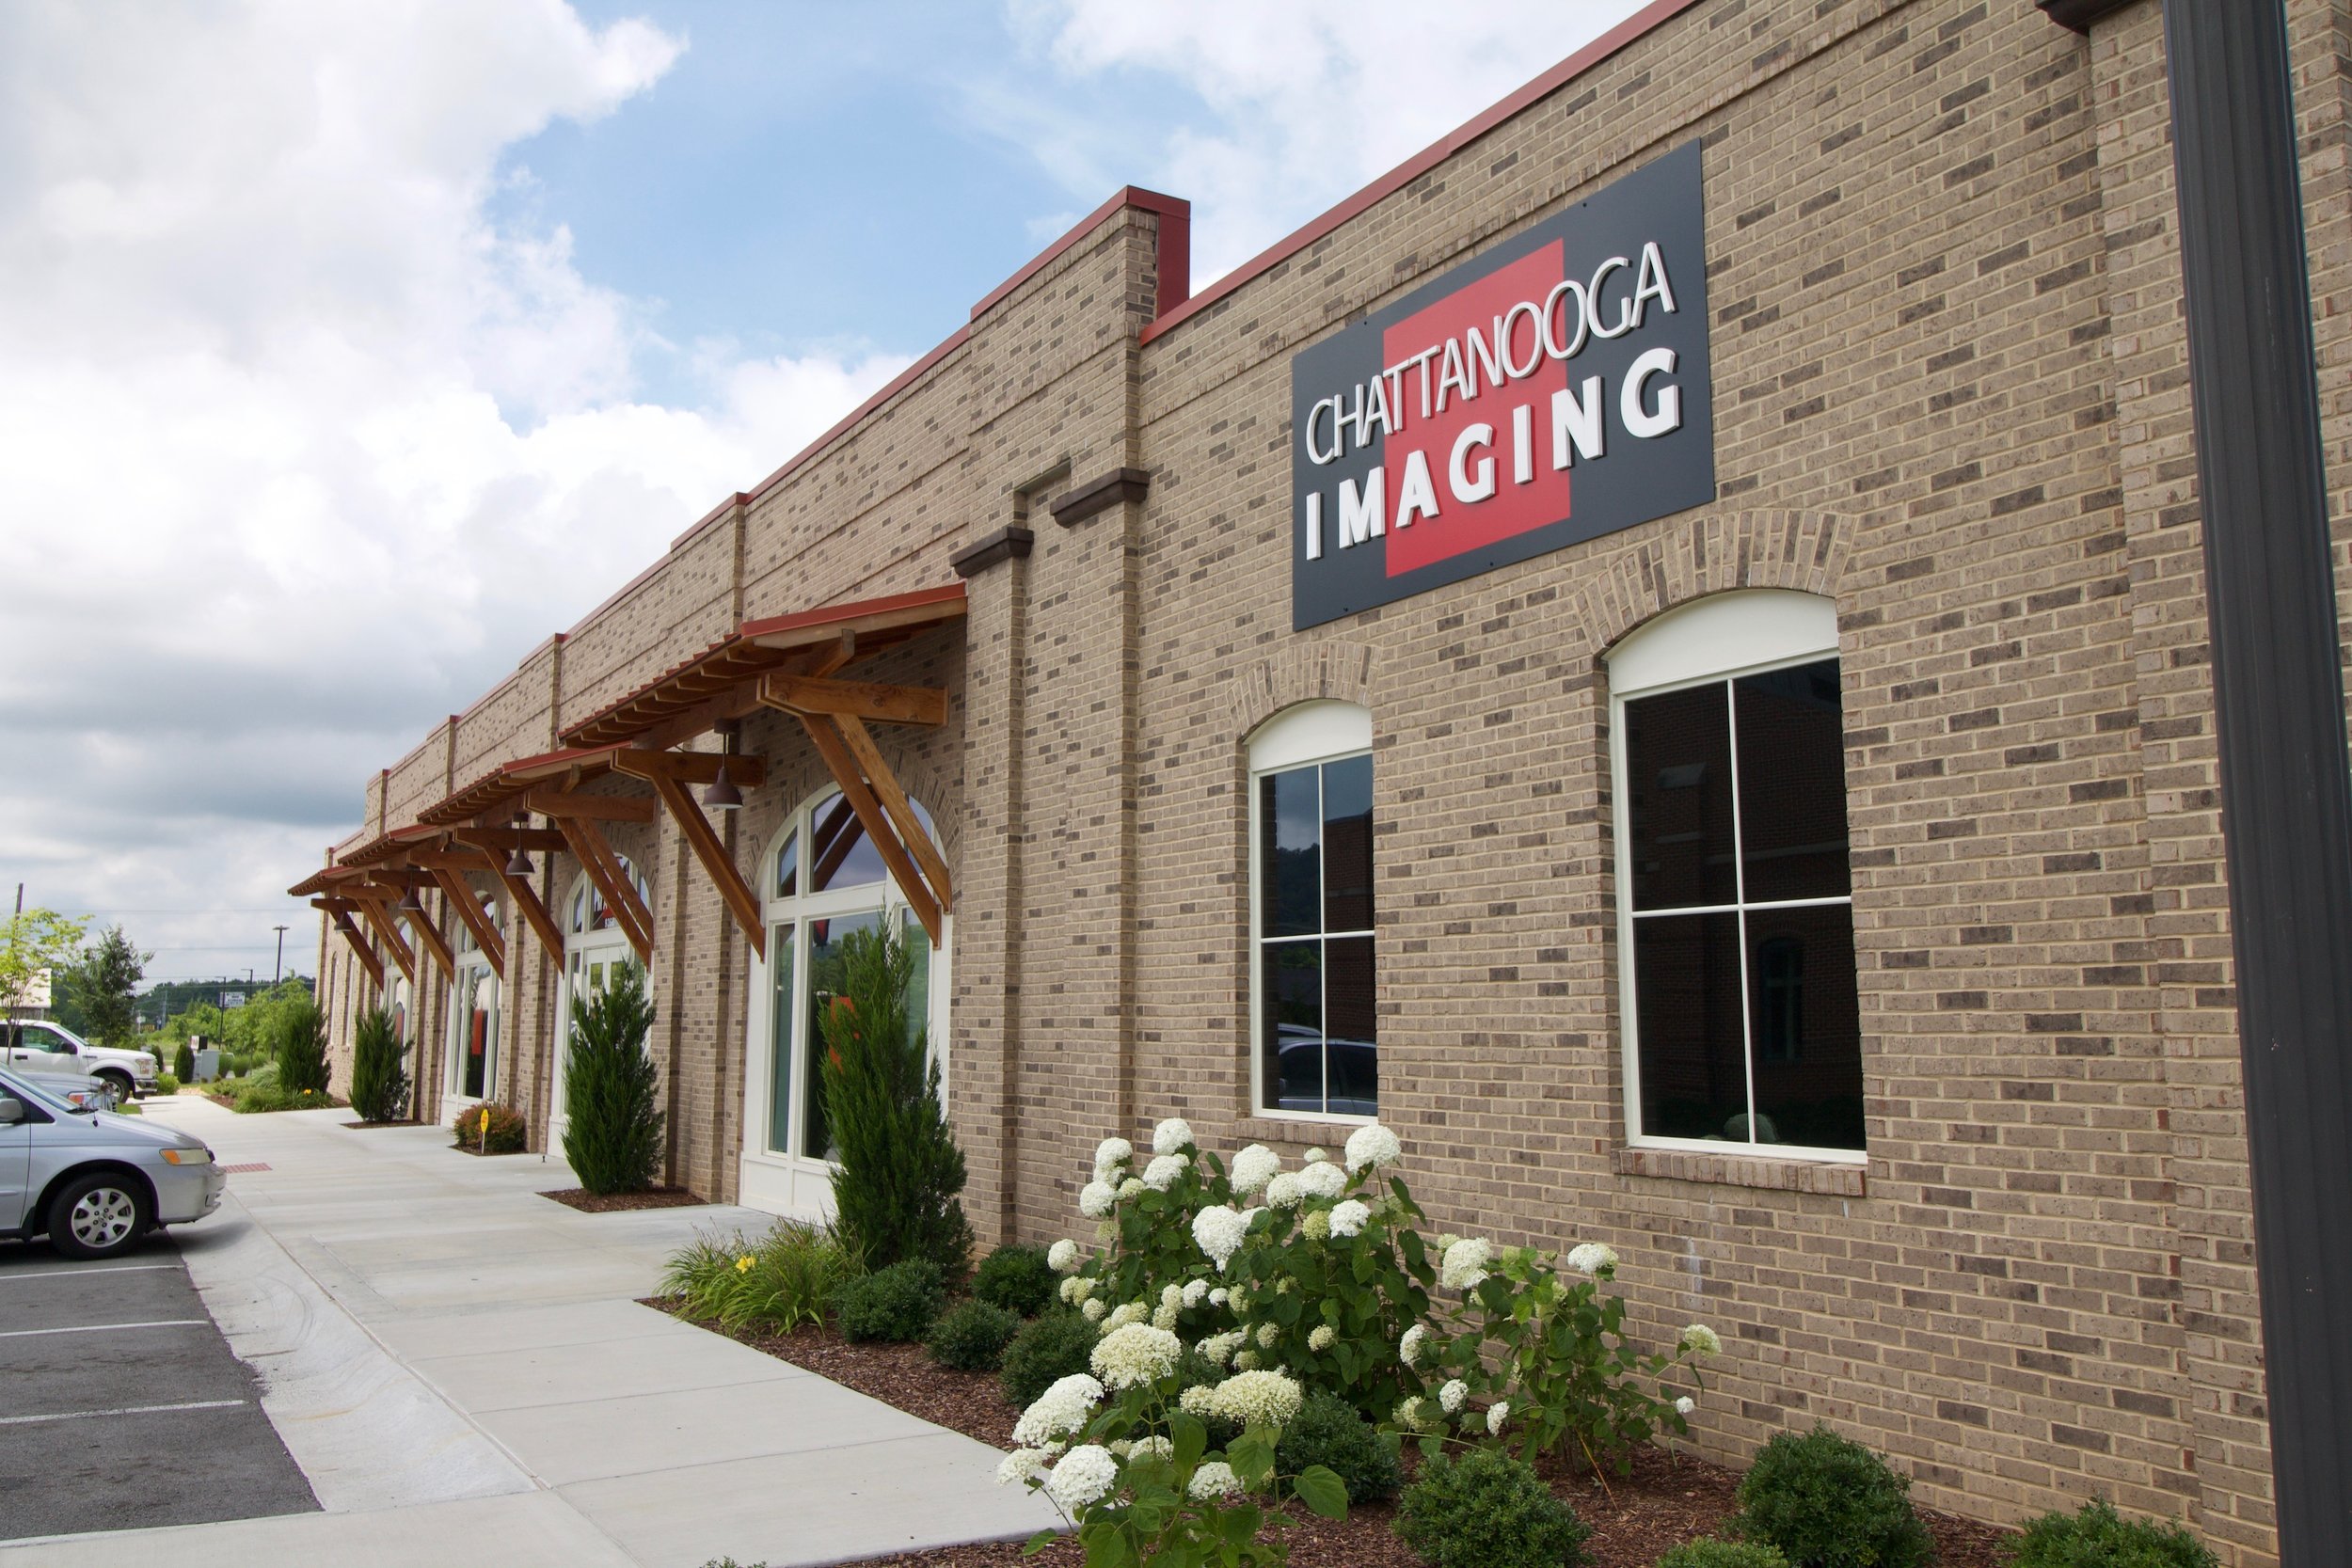 9,000 Square Foot Chattanooga Imaging Center